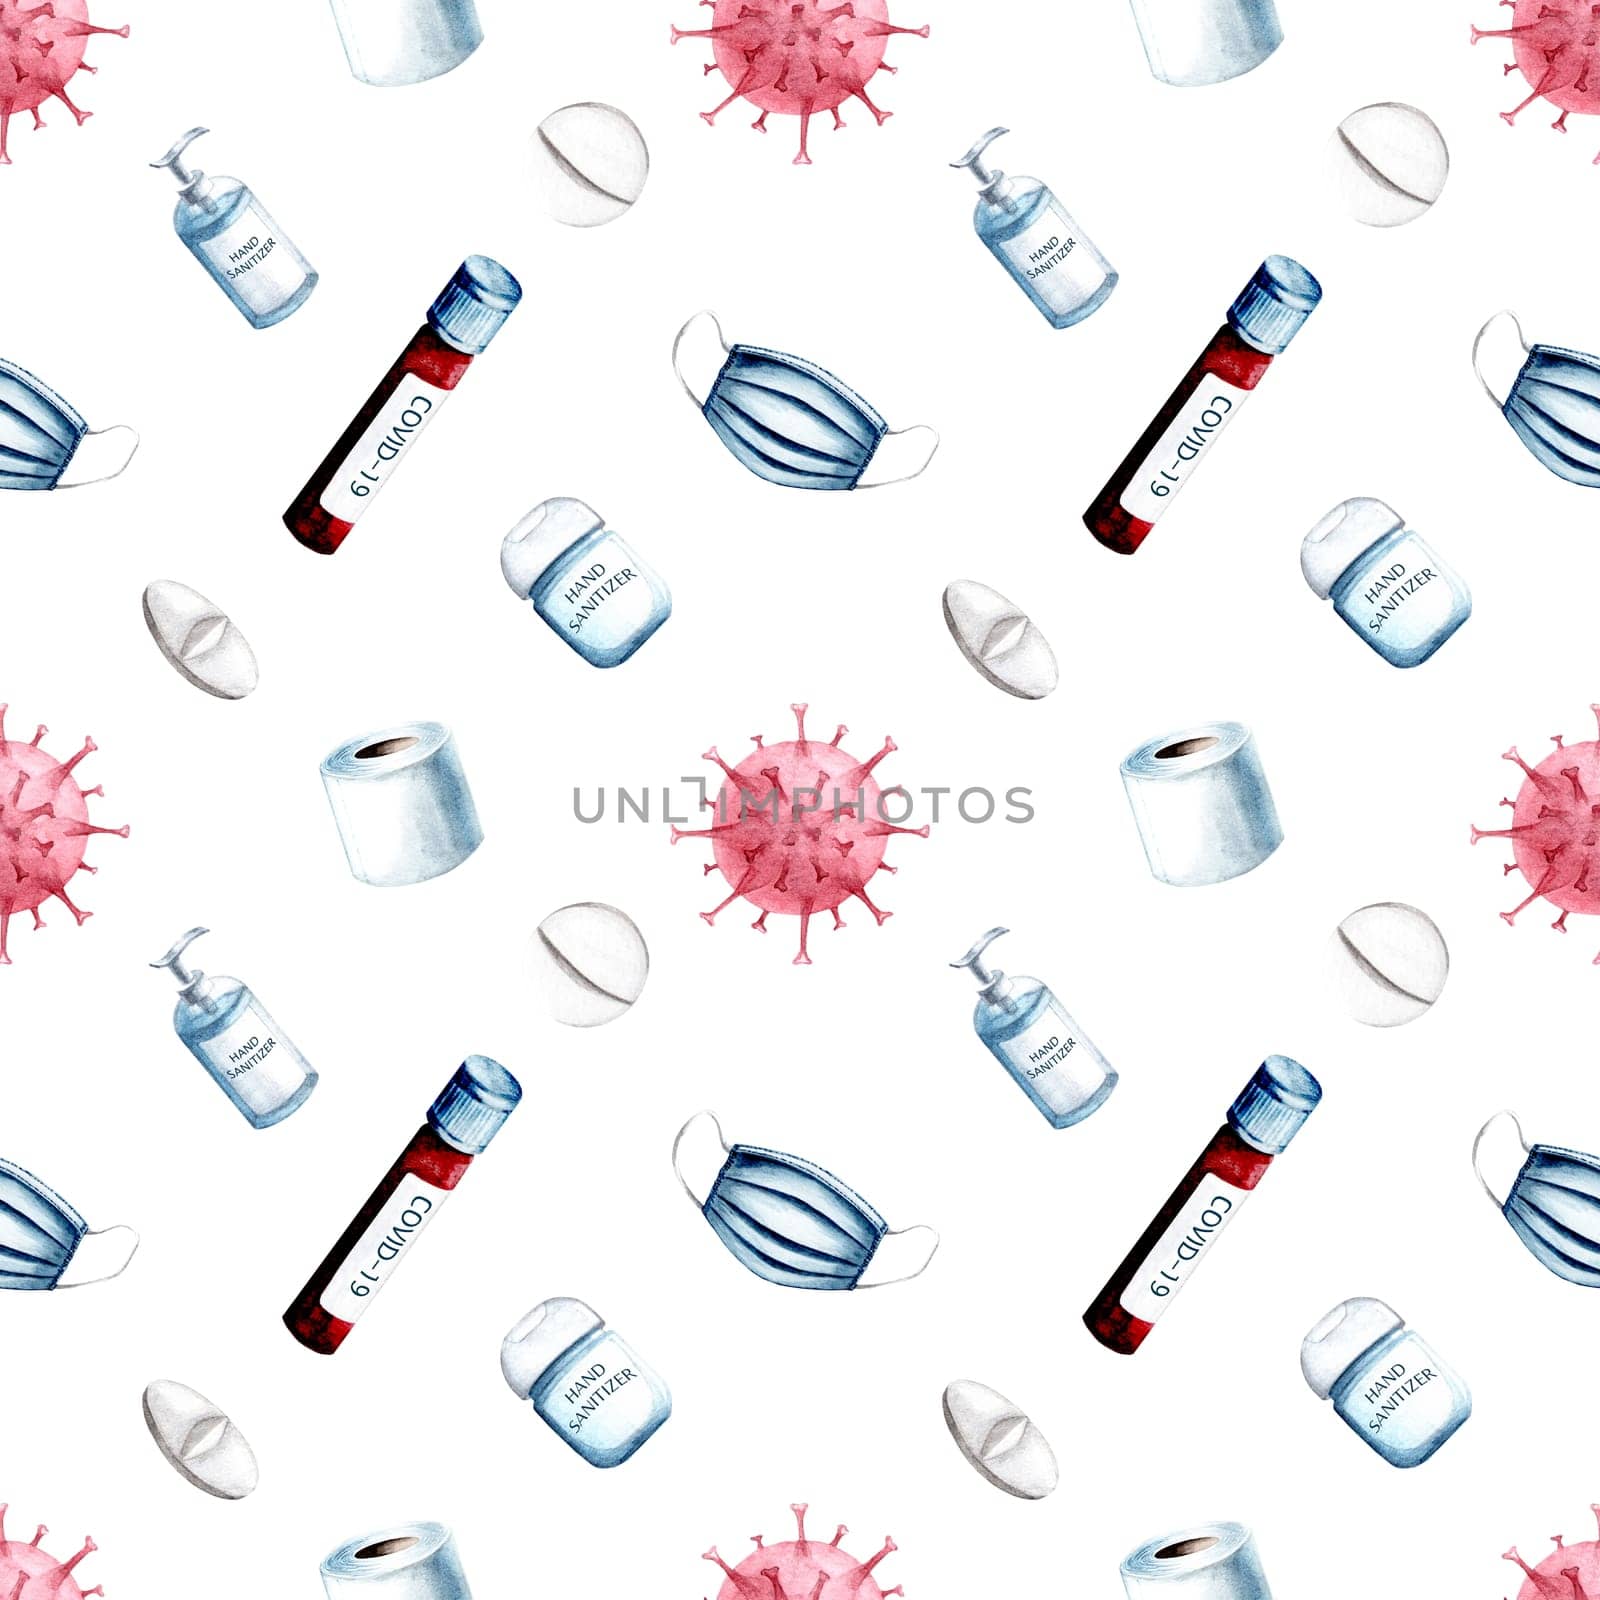 Watercolor hand drawn coronavirus medical supplies seamless pattern. Watercolour health care background with medical masks, sanitizers, pills, covid-19 vaccine on white background. by Anny_Sketches